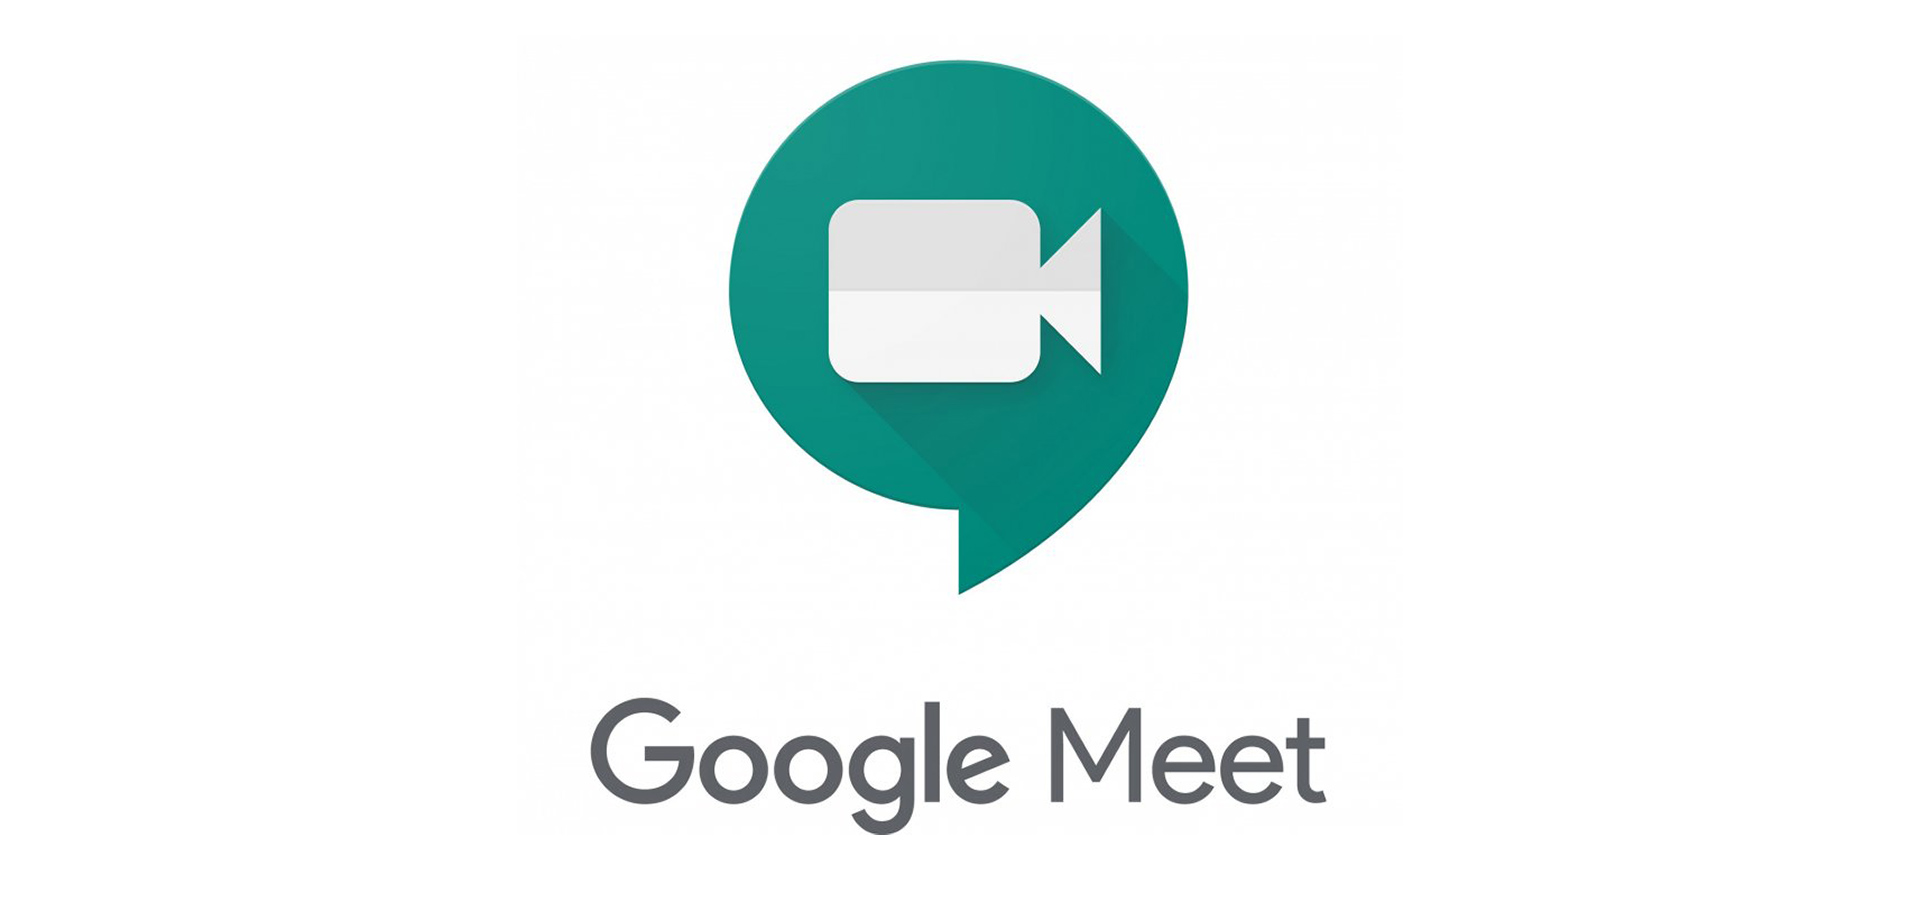 Google Meet, Google's Zoom competitor, is now free for everyone | Ars Technica